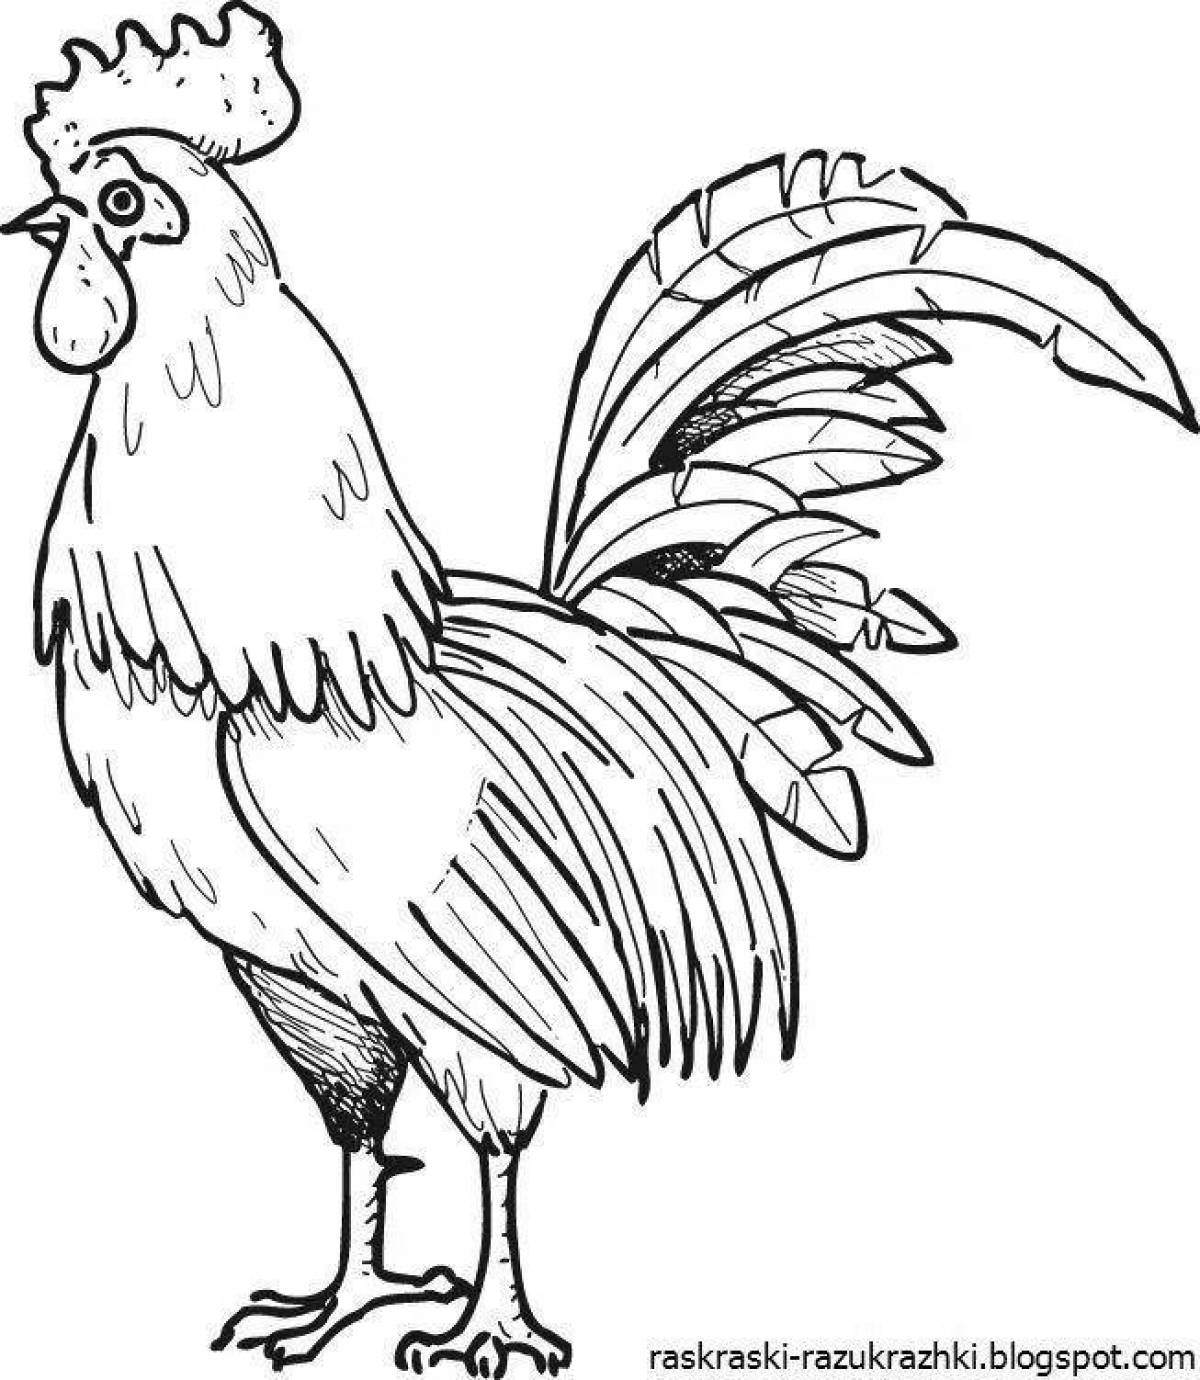 Coloring book shining rooster for kids